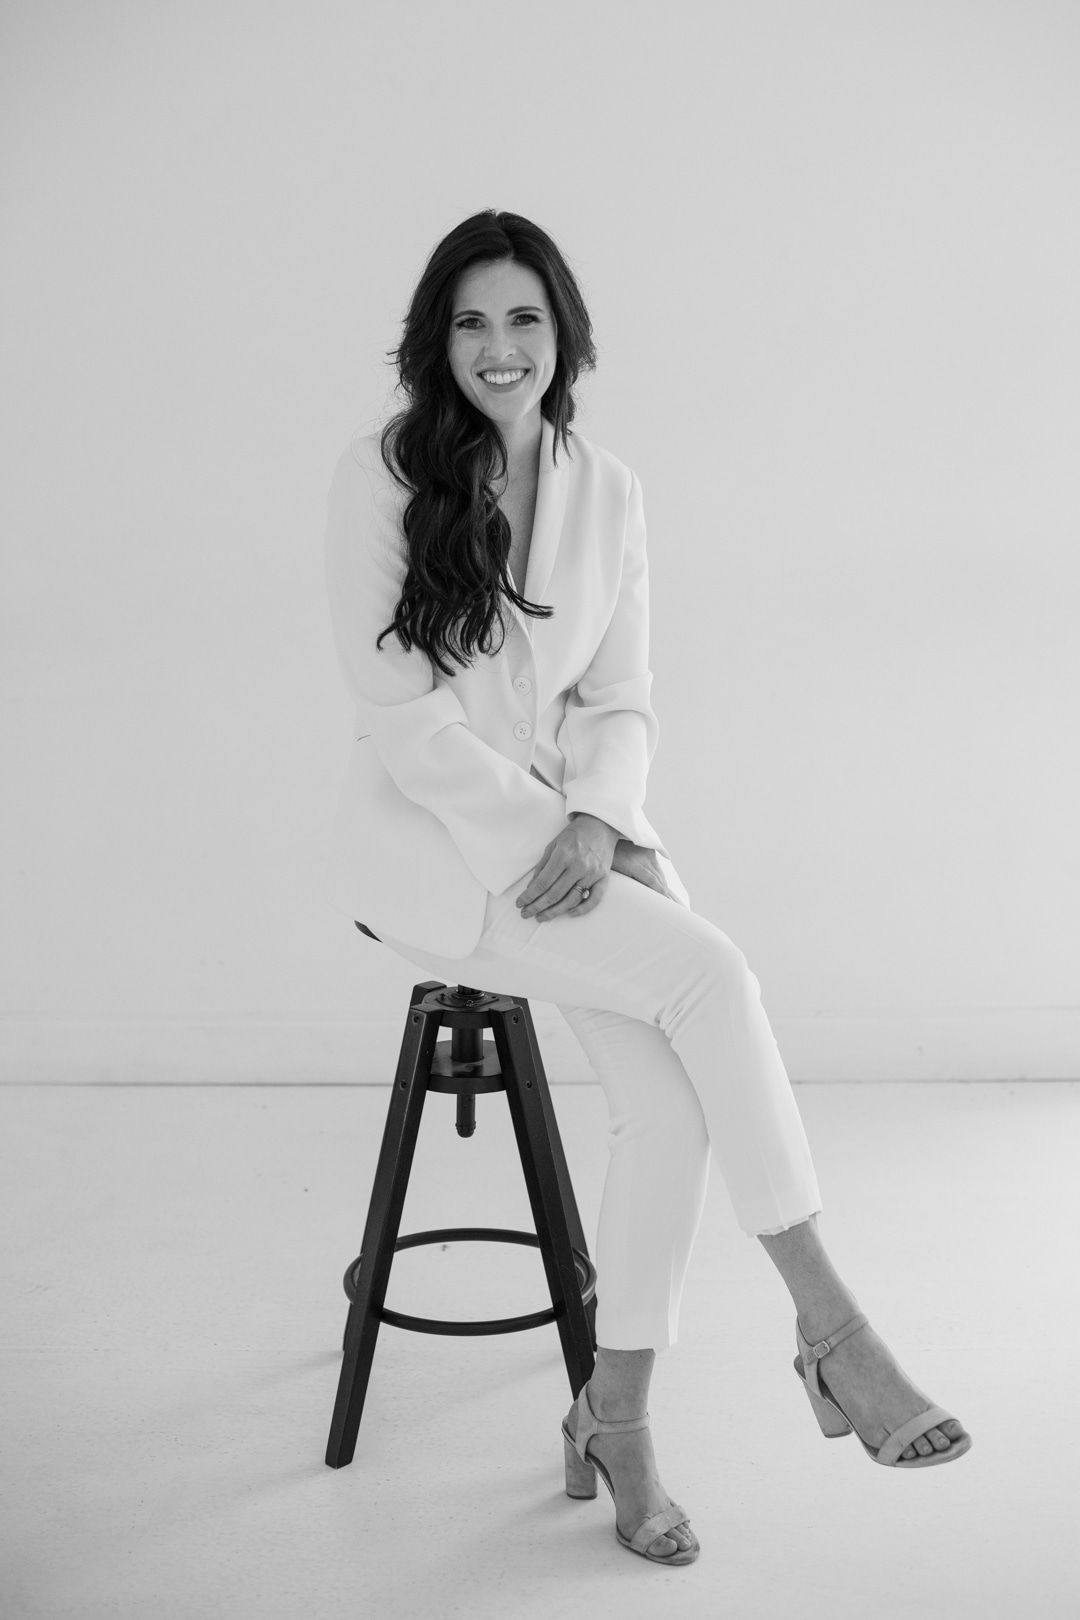 Karli Ivory and Vine Wedding and Event Co. woman sitting on stool black and white